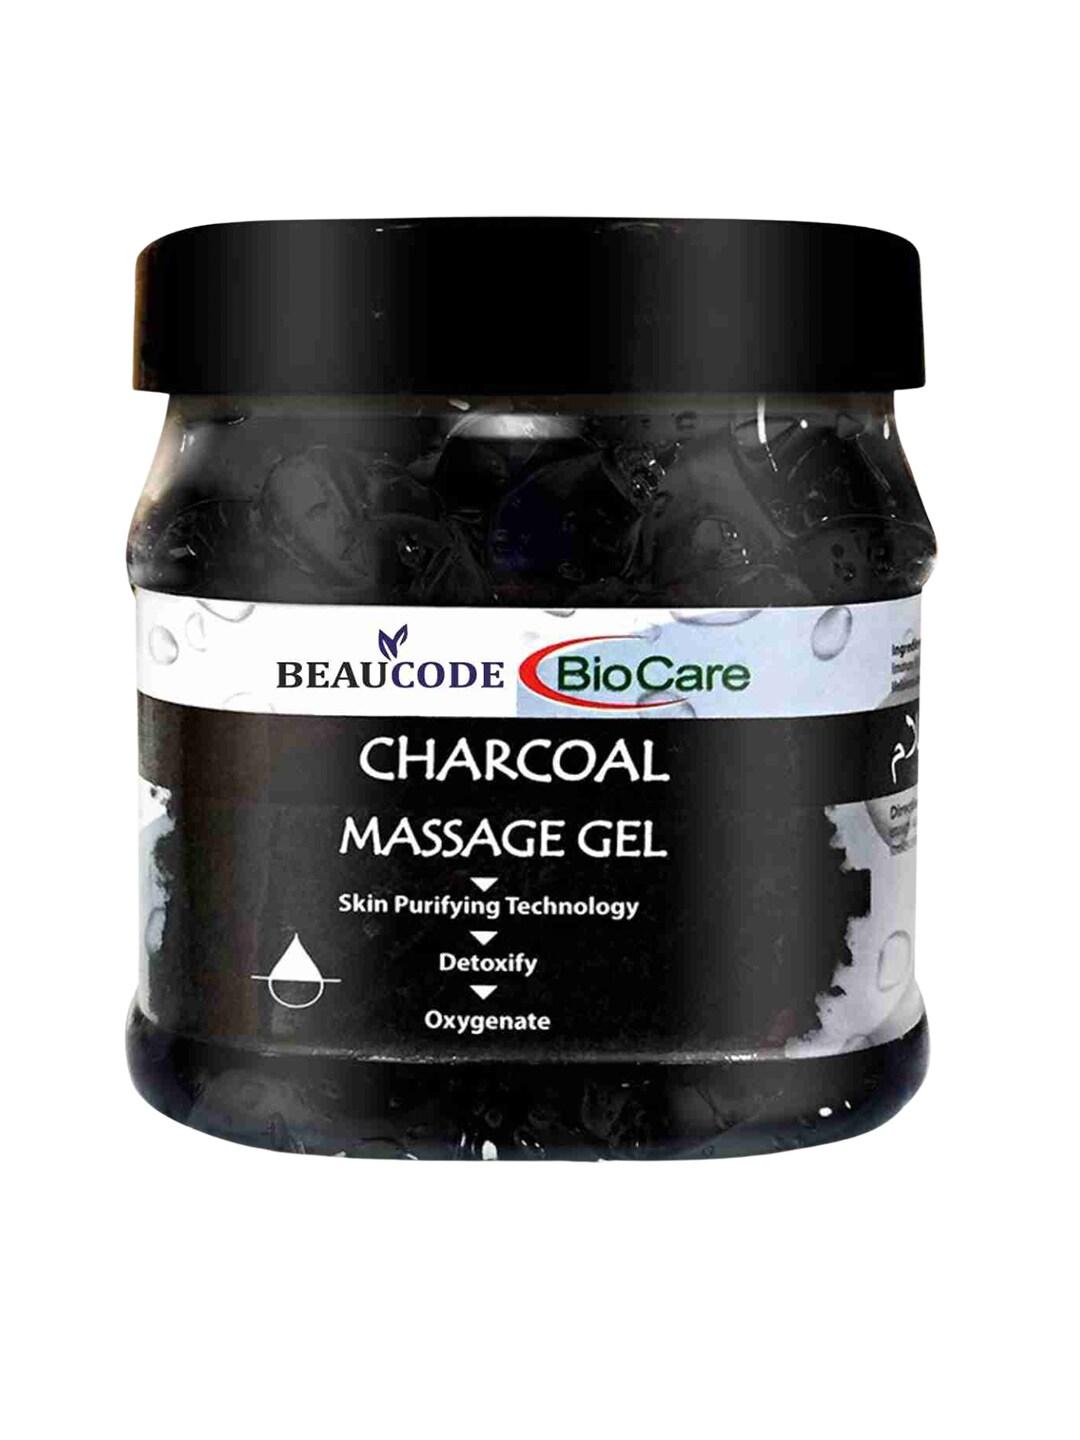 BEAUCODE BIOCARE Charcoal Massage Gel with Skin Purifying Technology - 250ml